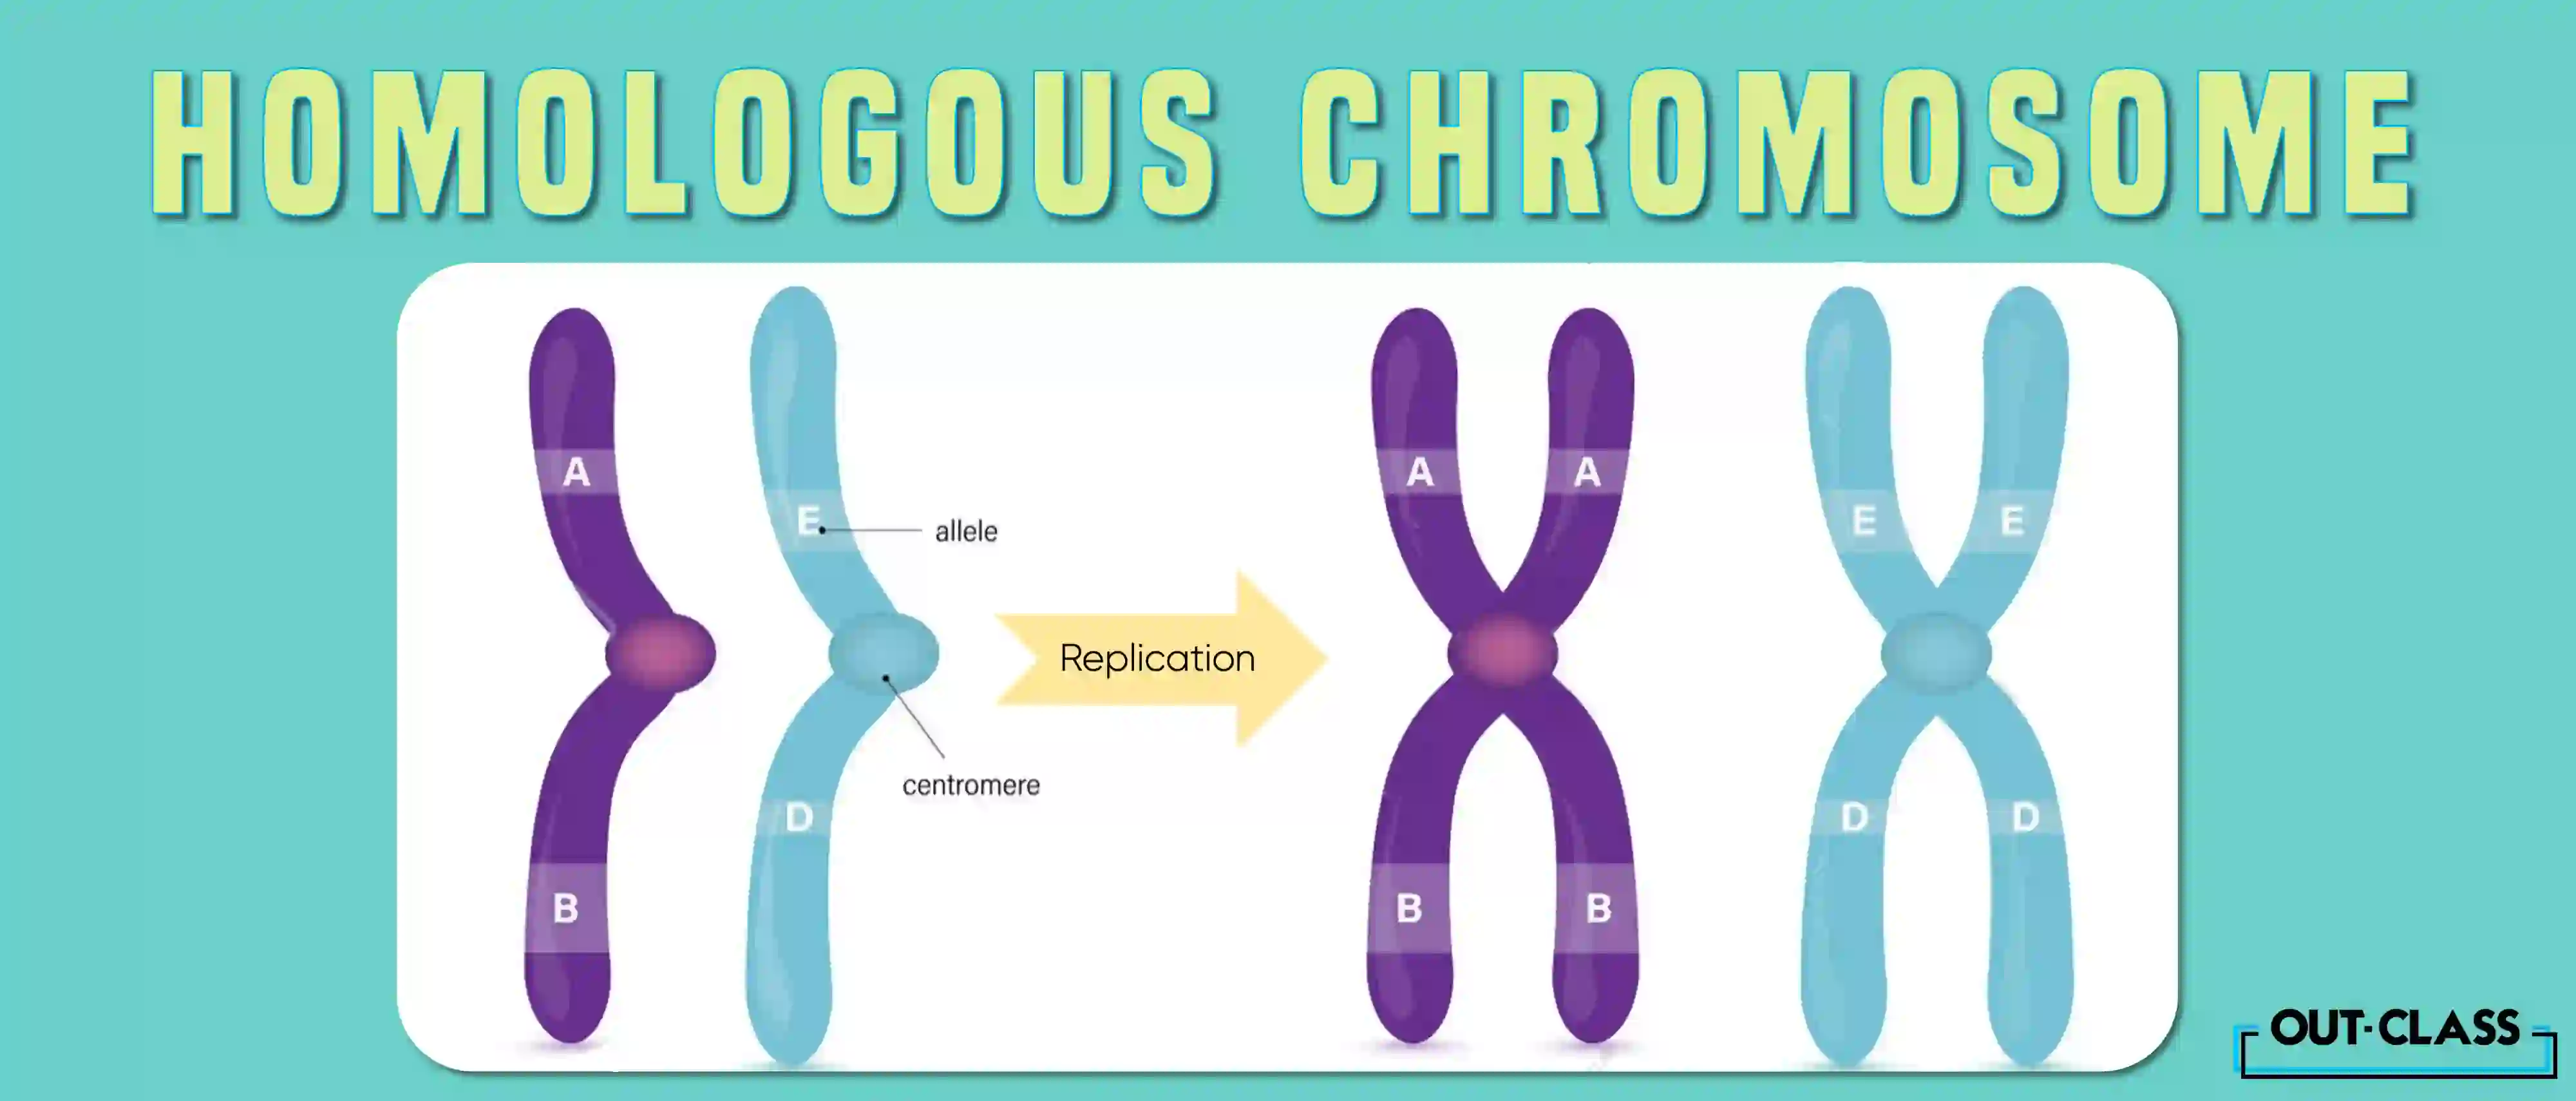 Homologous chromosomes as a pair of siblings, one of which comes from your mother while the other comes from your father. Each pair has similar genes; however, some may have different versions of those genes. These versions are known as alleles or allelomorphs.